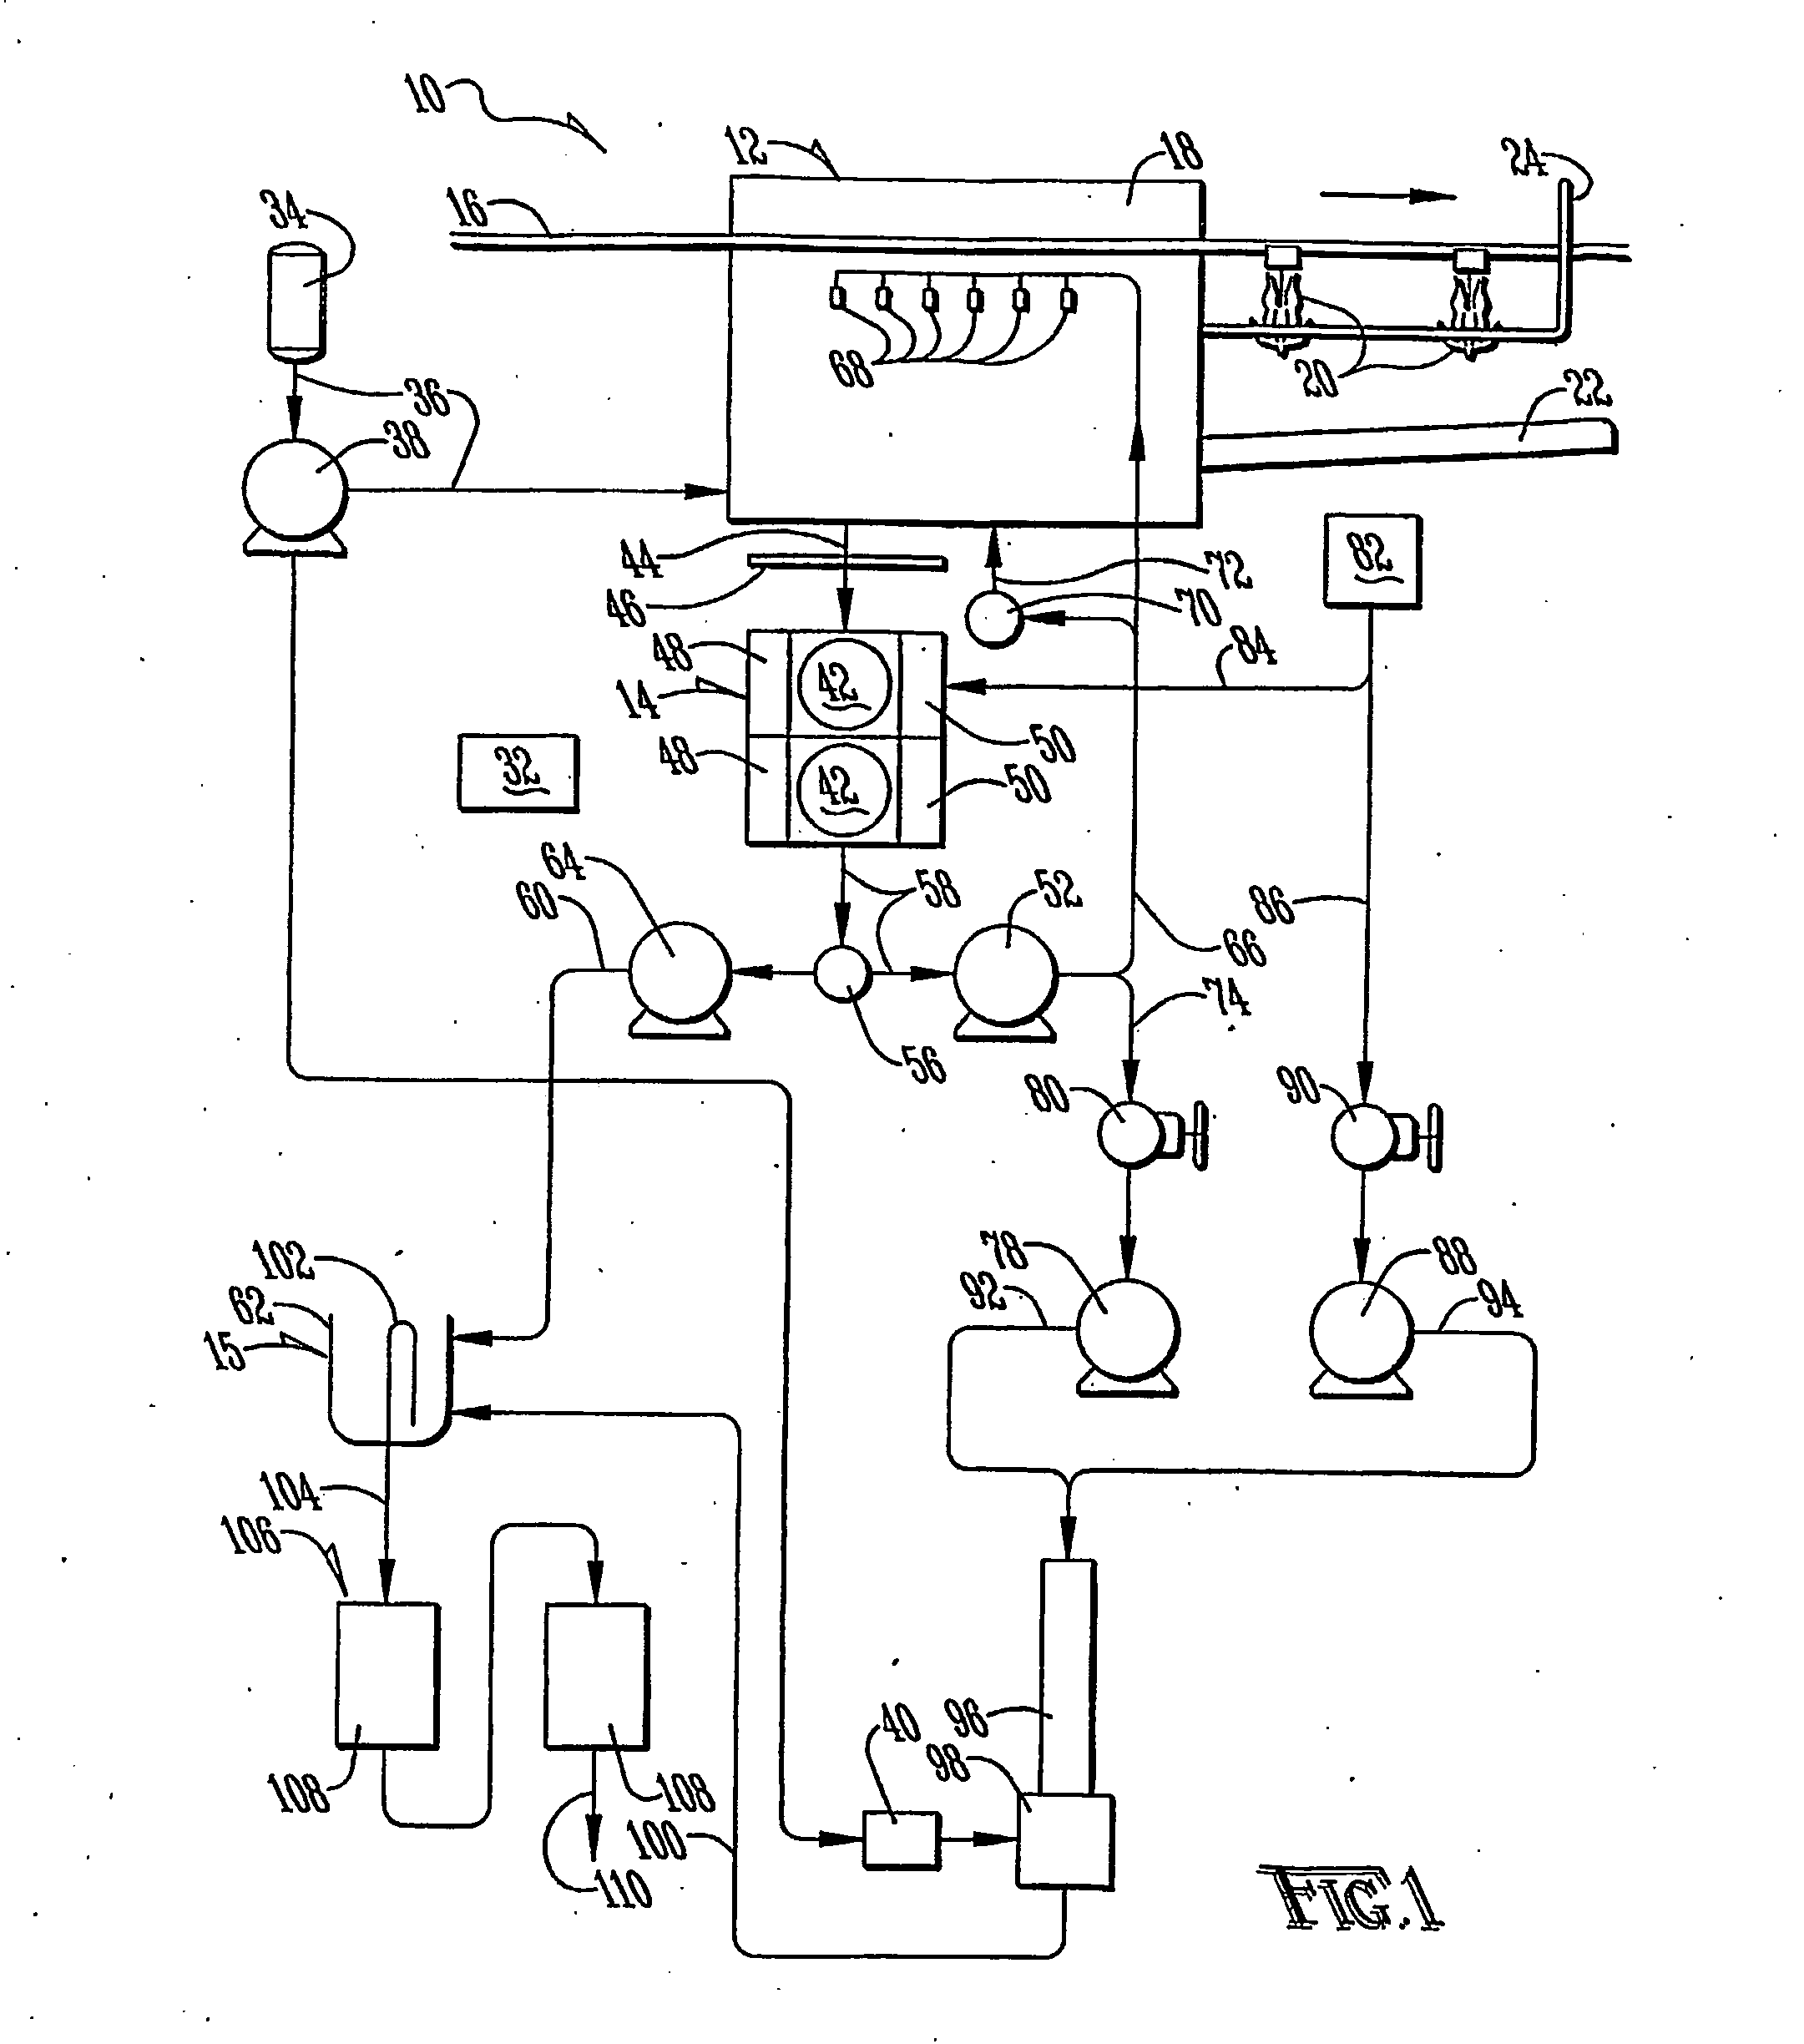 Application System with Recycle and Related Use of Antimicrobial Quaternary Ammonium Compound